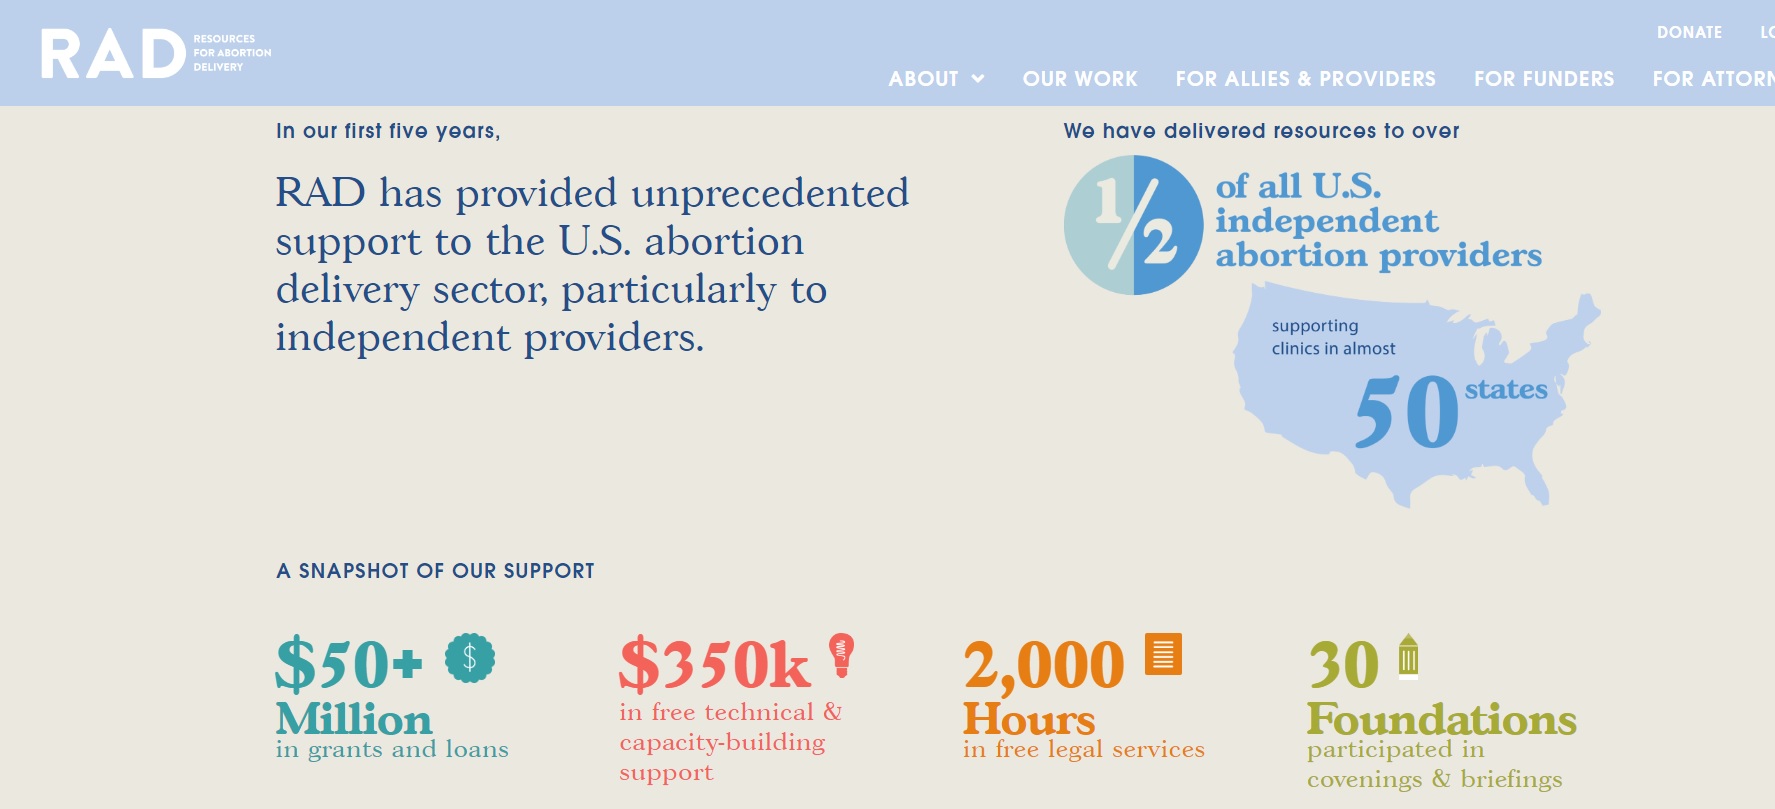 Image: RAD Resources for Abortion Delivery assists with legal and funding